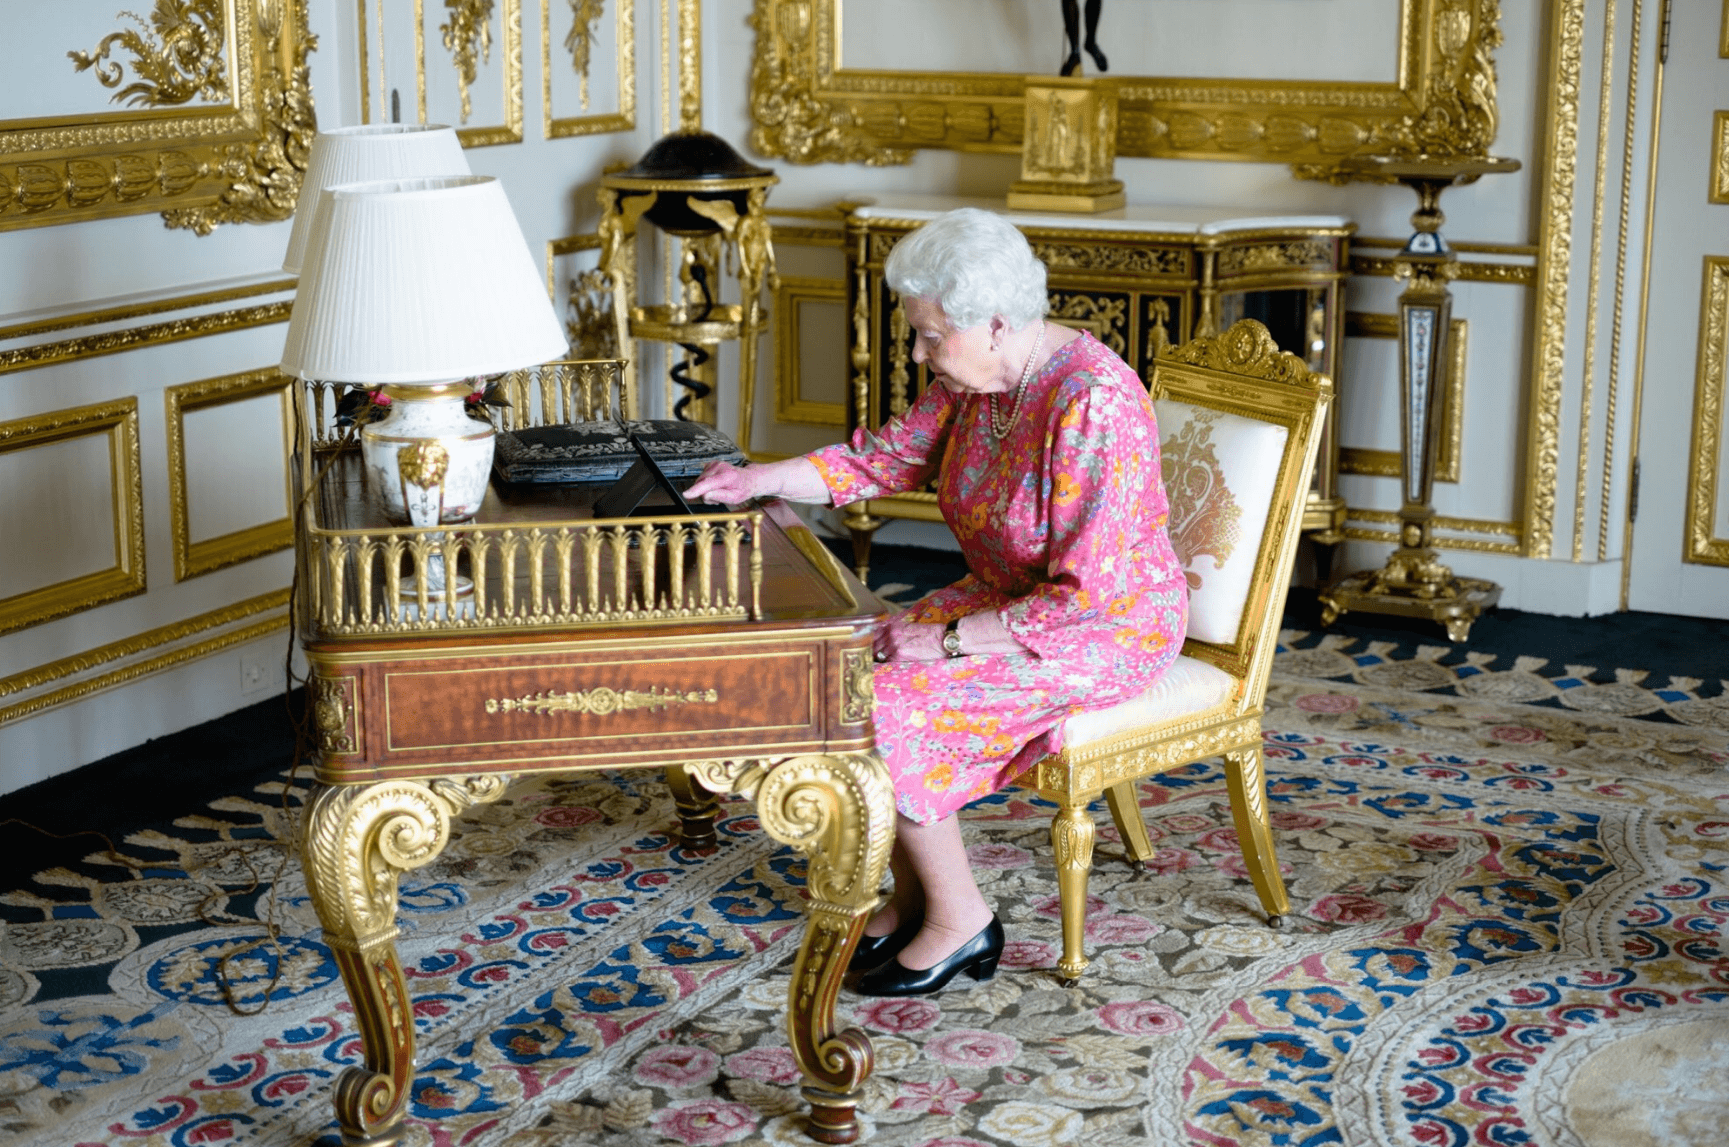 See Queen Elizabeth II tweeting from the royal iPad - Comments. 